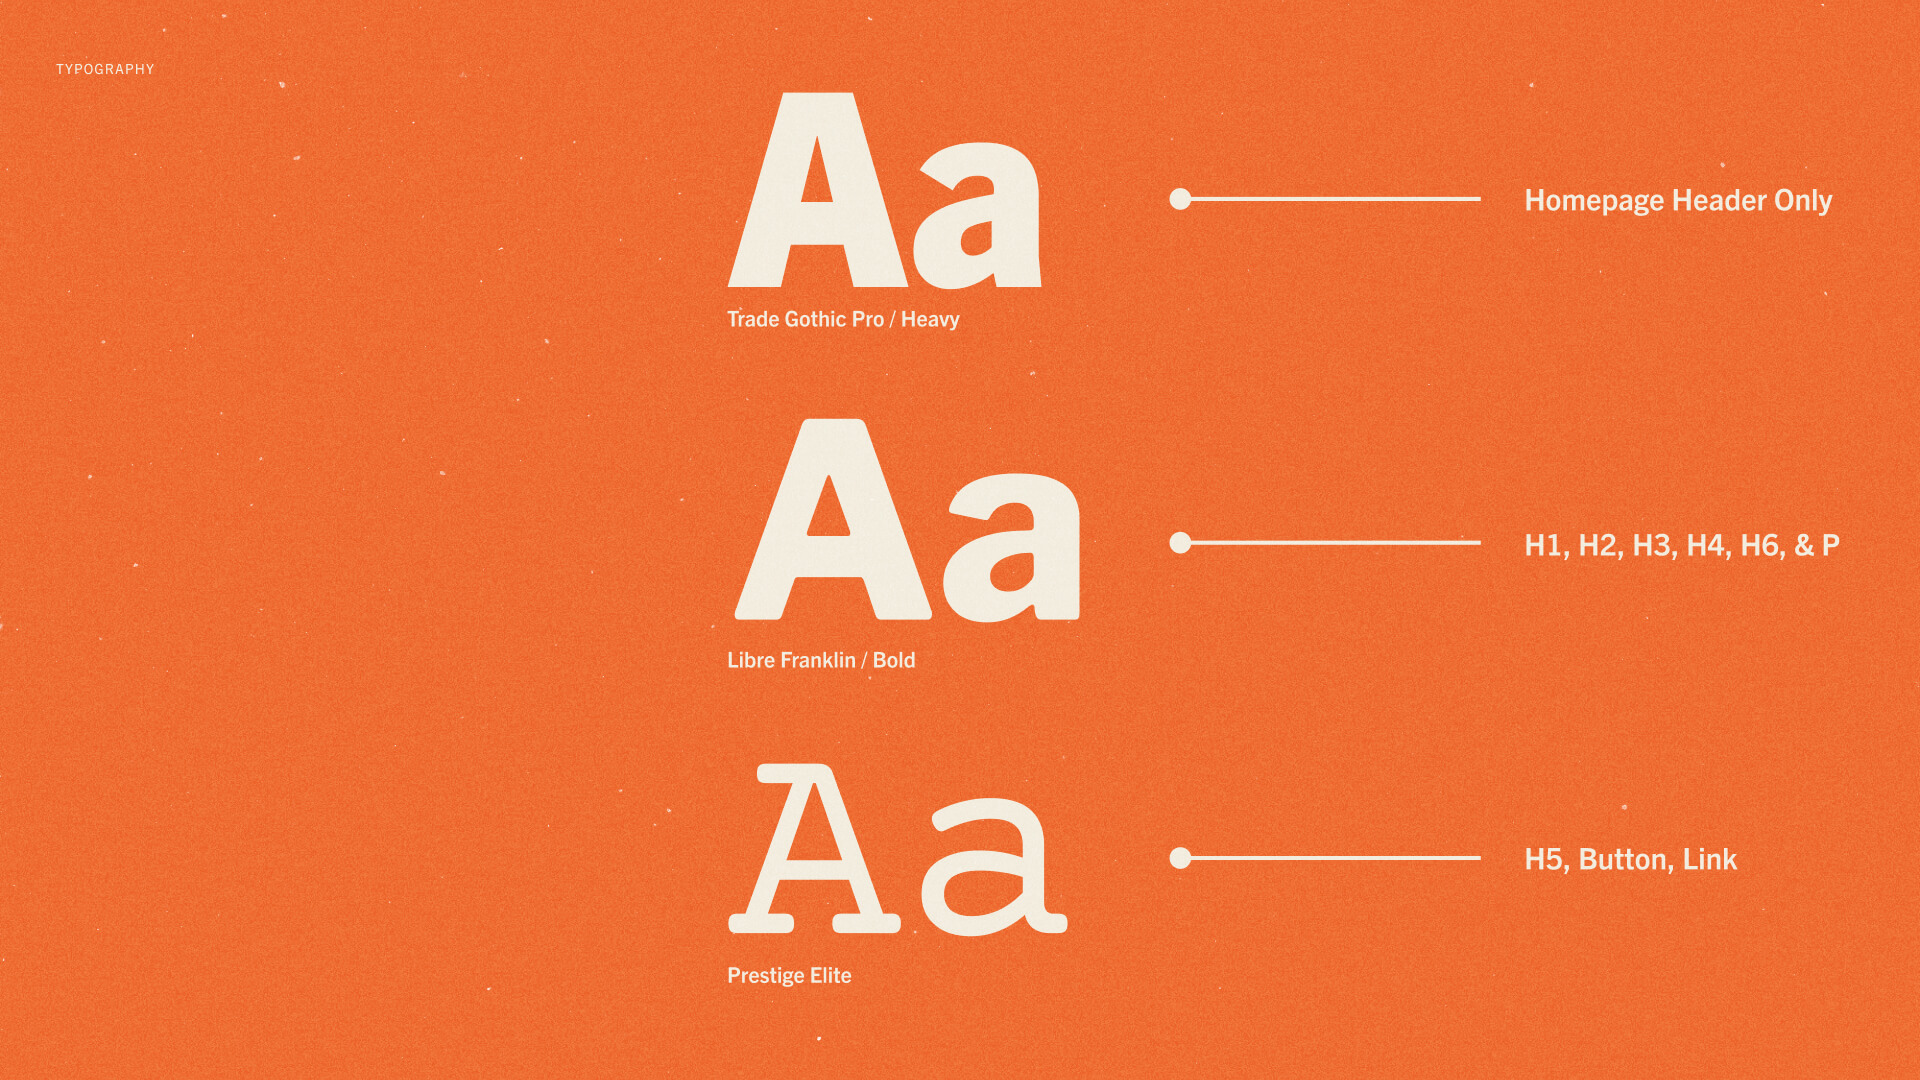 Typography system showcasing the different fonts used for the TWF brand.